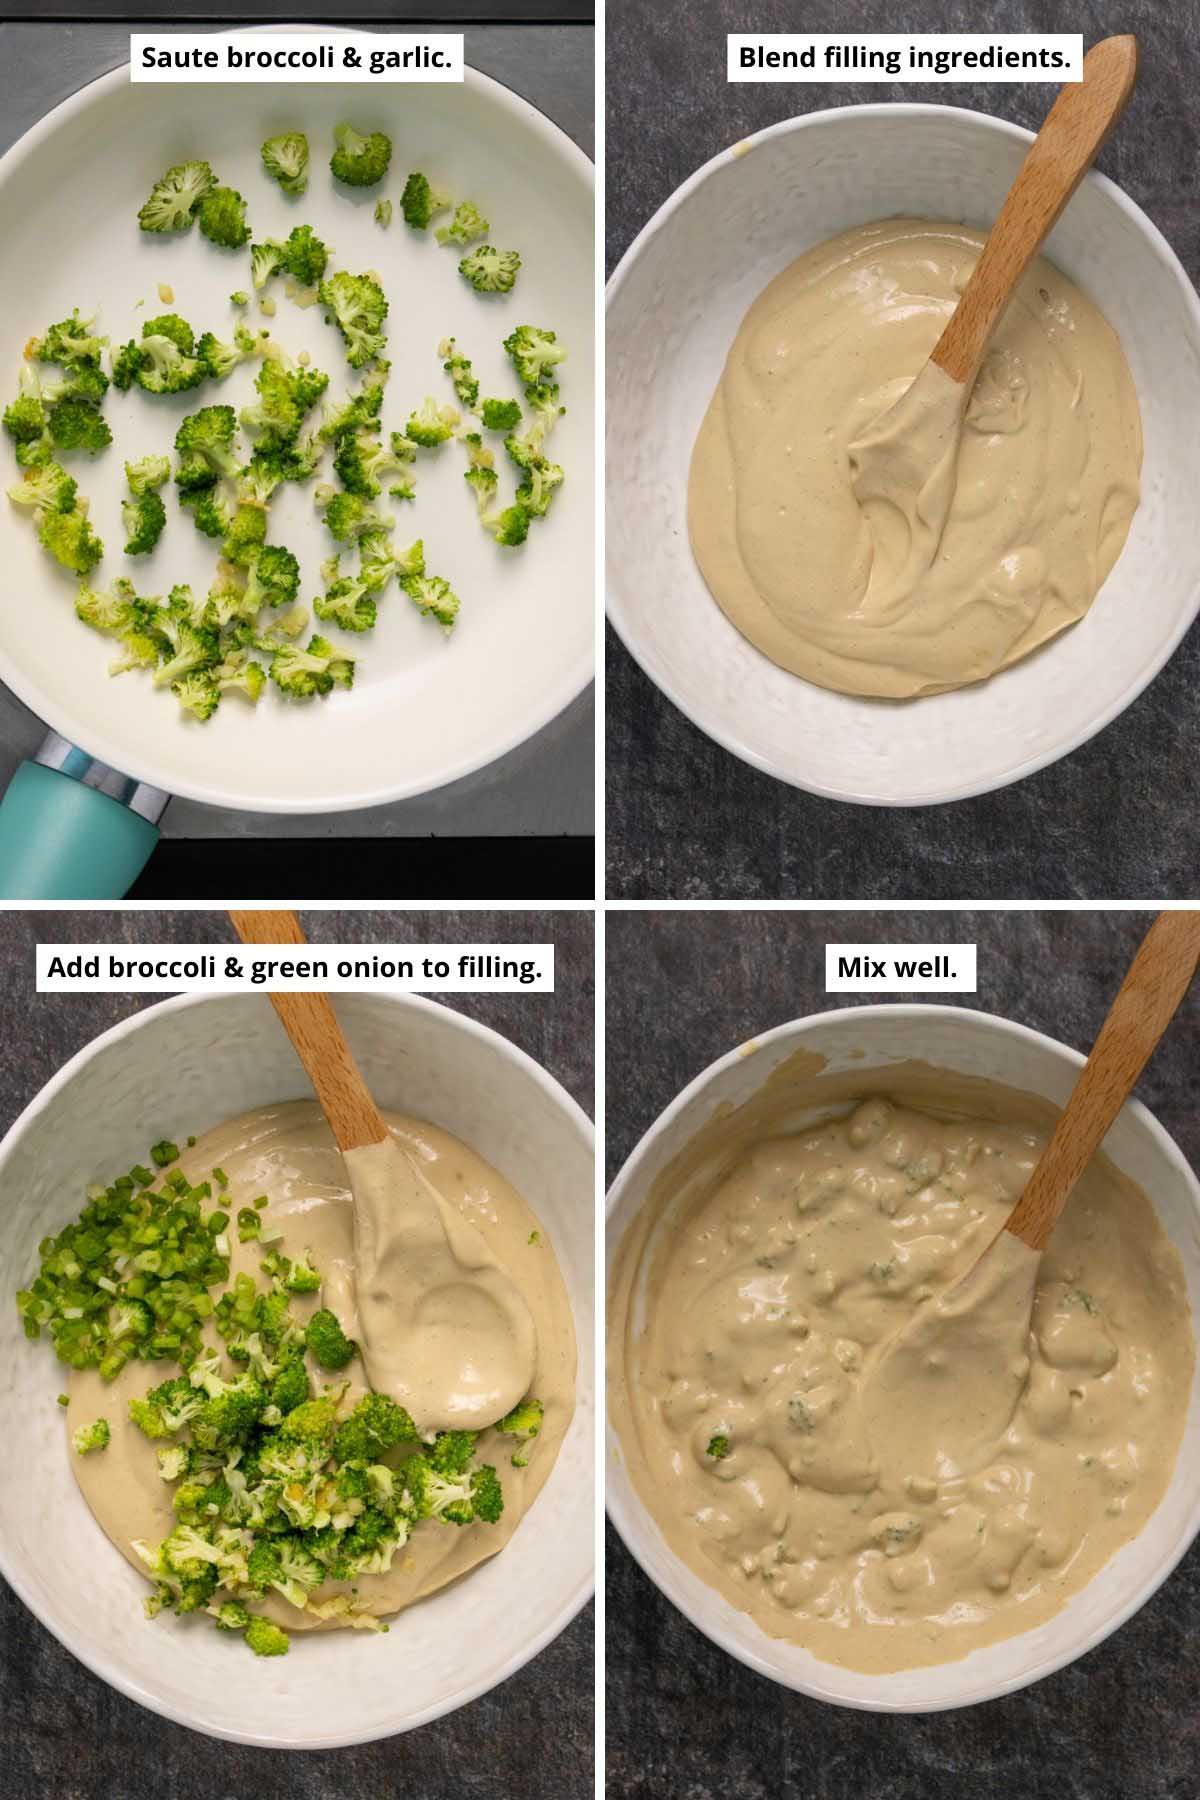 image collage showing the cooked broccoli, the blended quiche filling, and the broccoli added to the filling before and after mixing